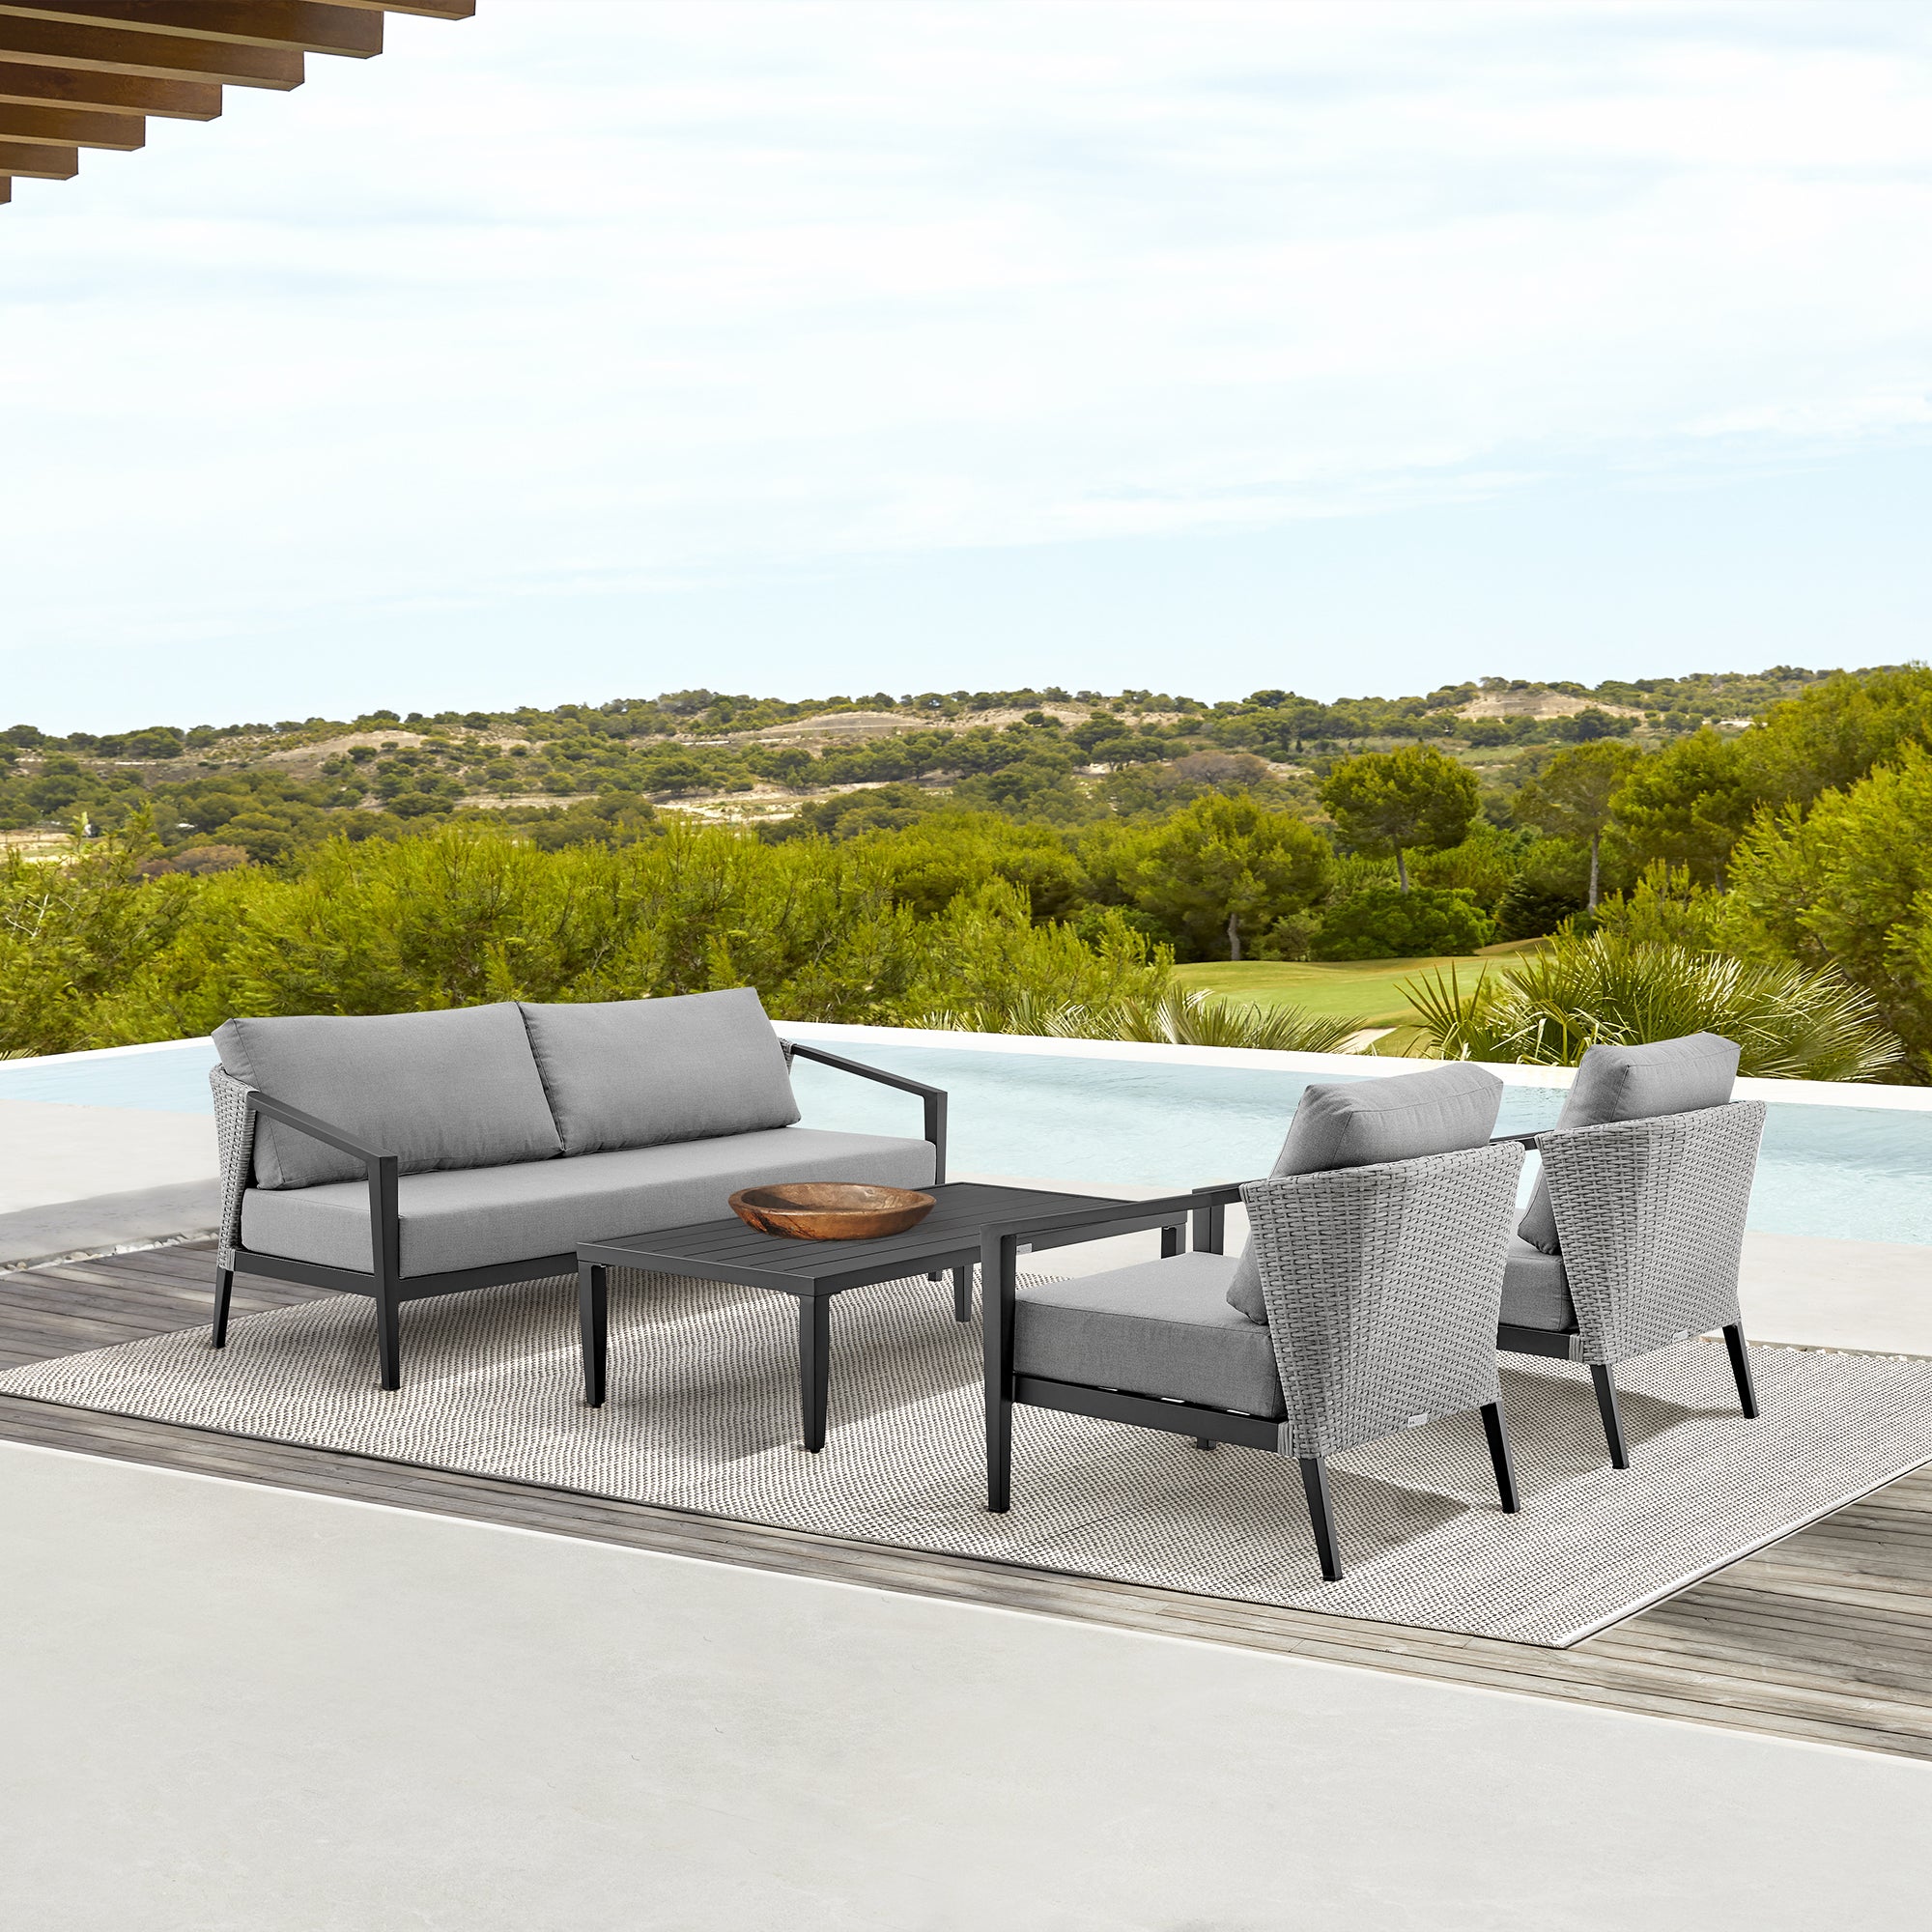 Armen Living - Aileen Outdoor Patio 4-Piece Lounge Set in Aluminum and Wicker with Grey Cushions - 840254333239